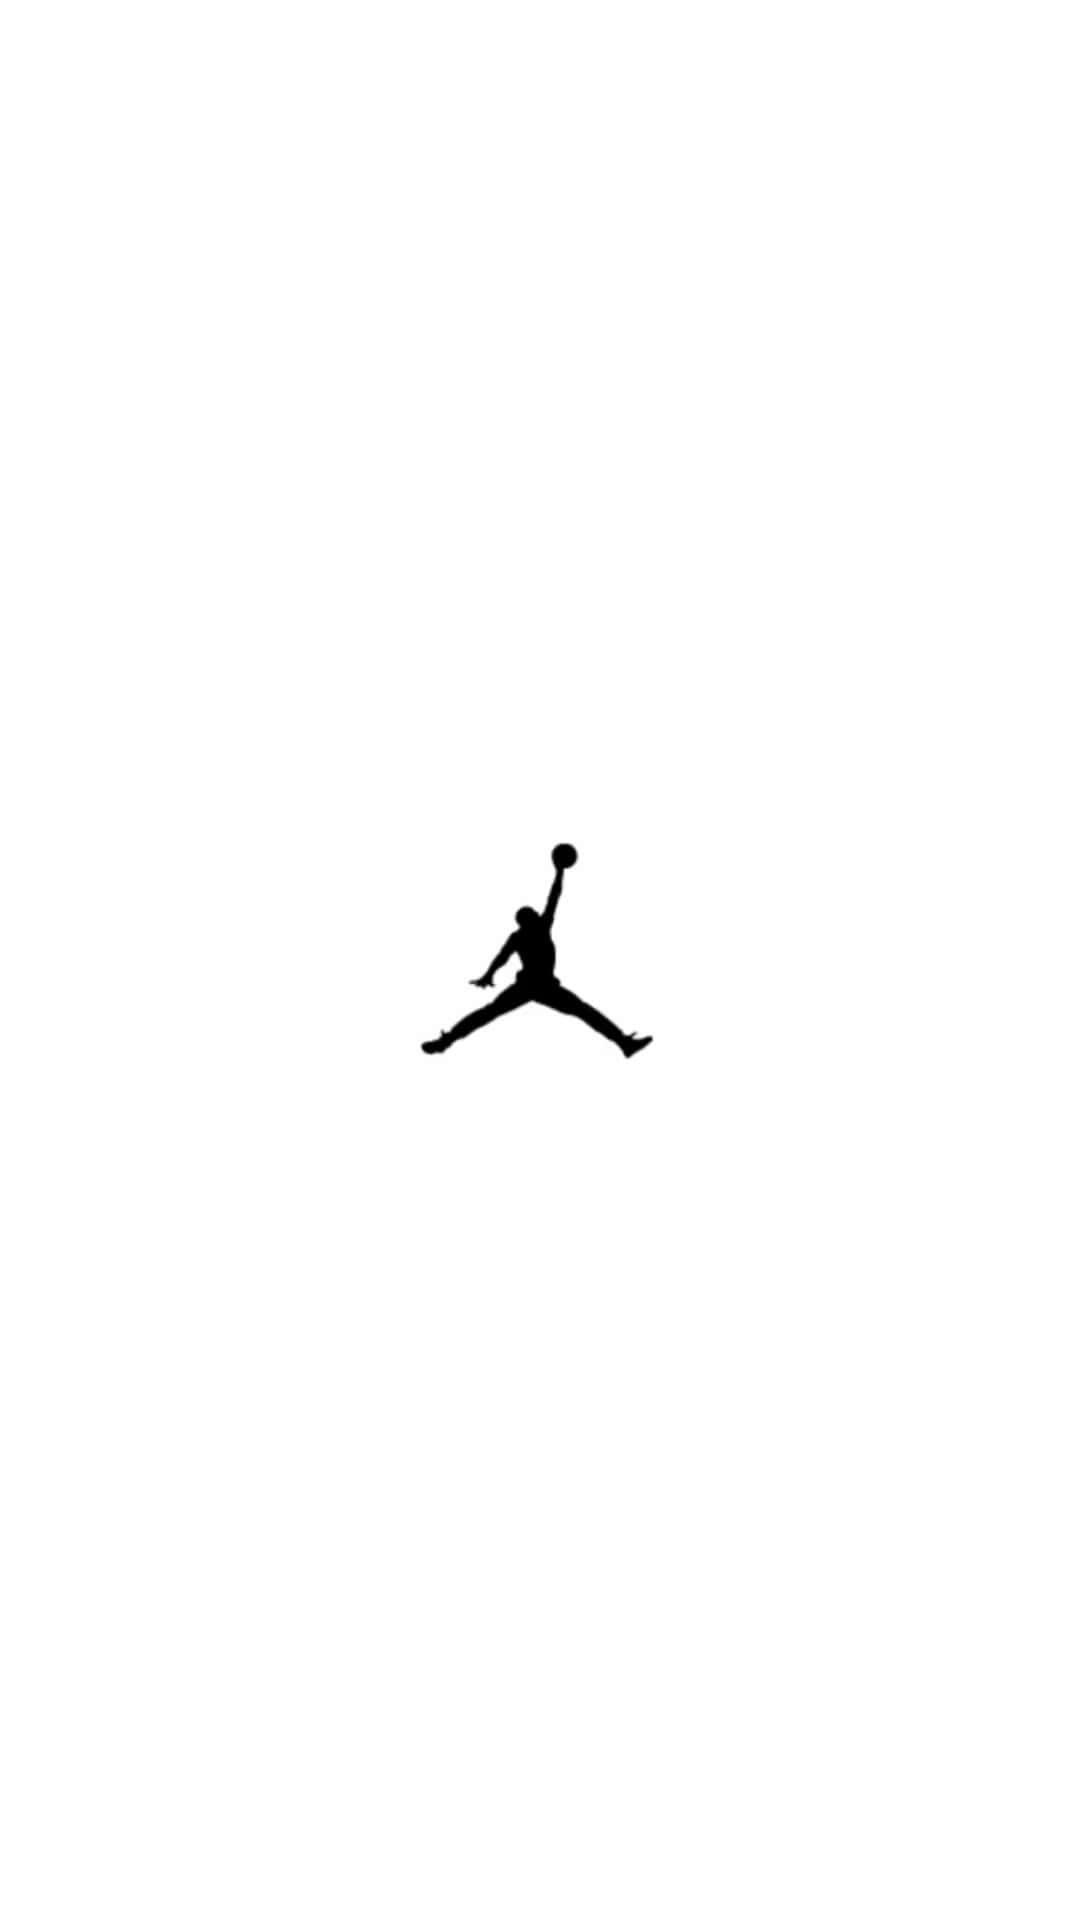 Celebrating the Iconic Jordan Brand with A Phone Wallpaper